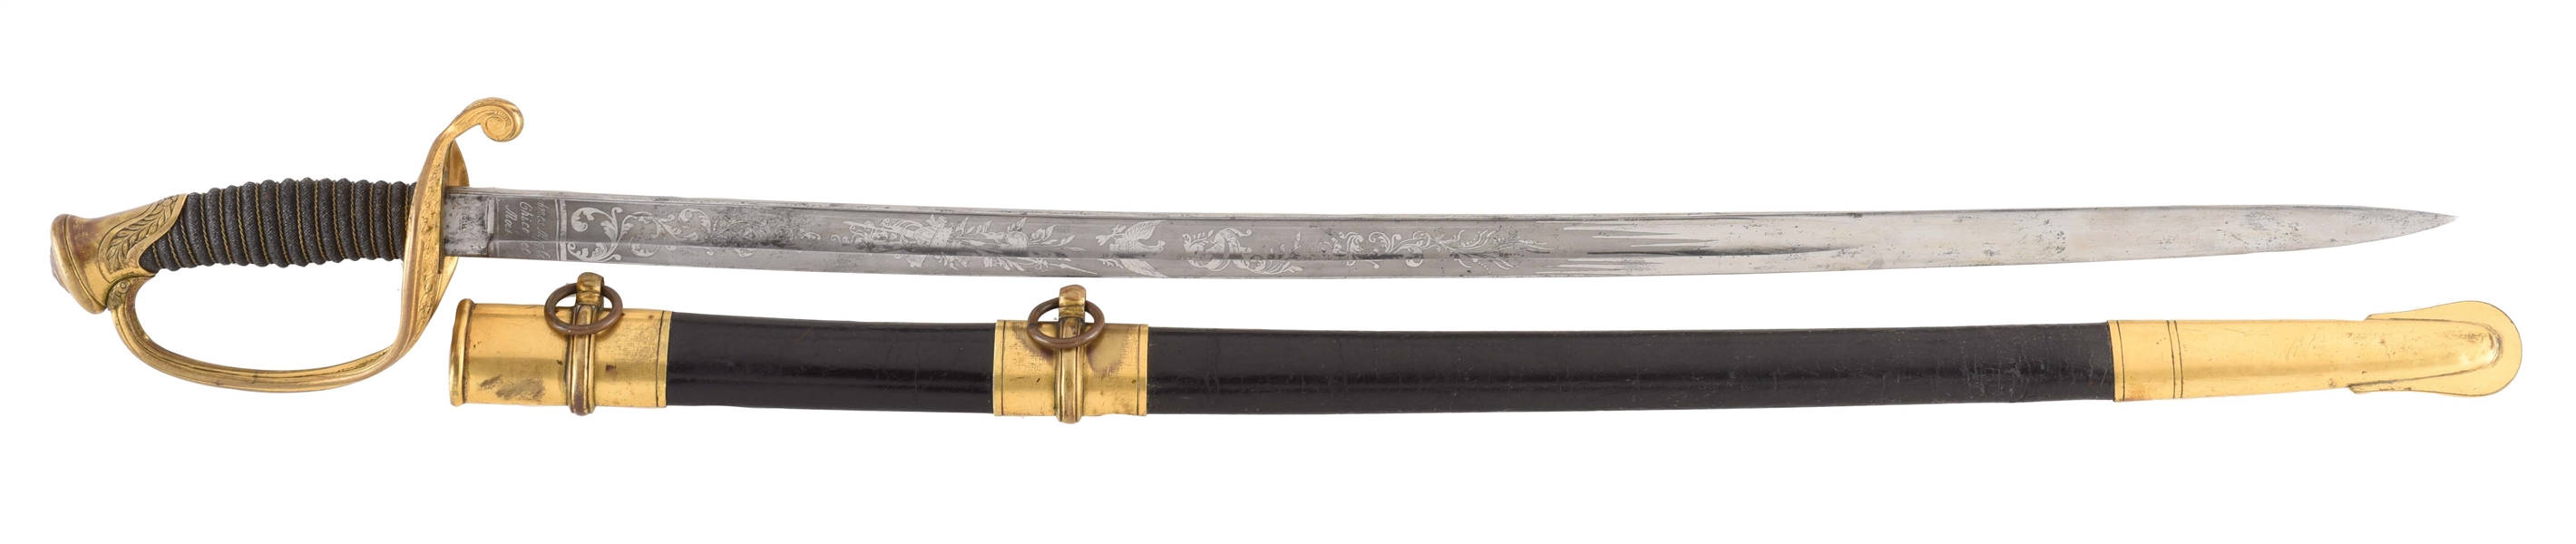 RARE GOVERNMENT INSPECTED U.S. MODEL 1850 FOOT OFFICERS SWORD BY AMES.